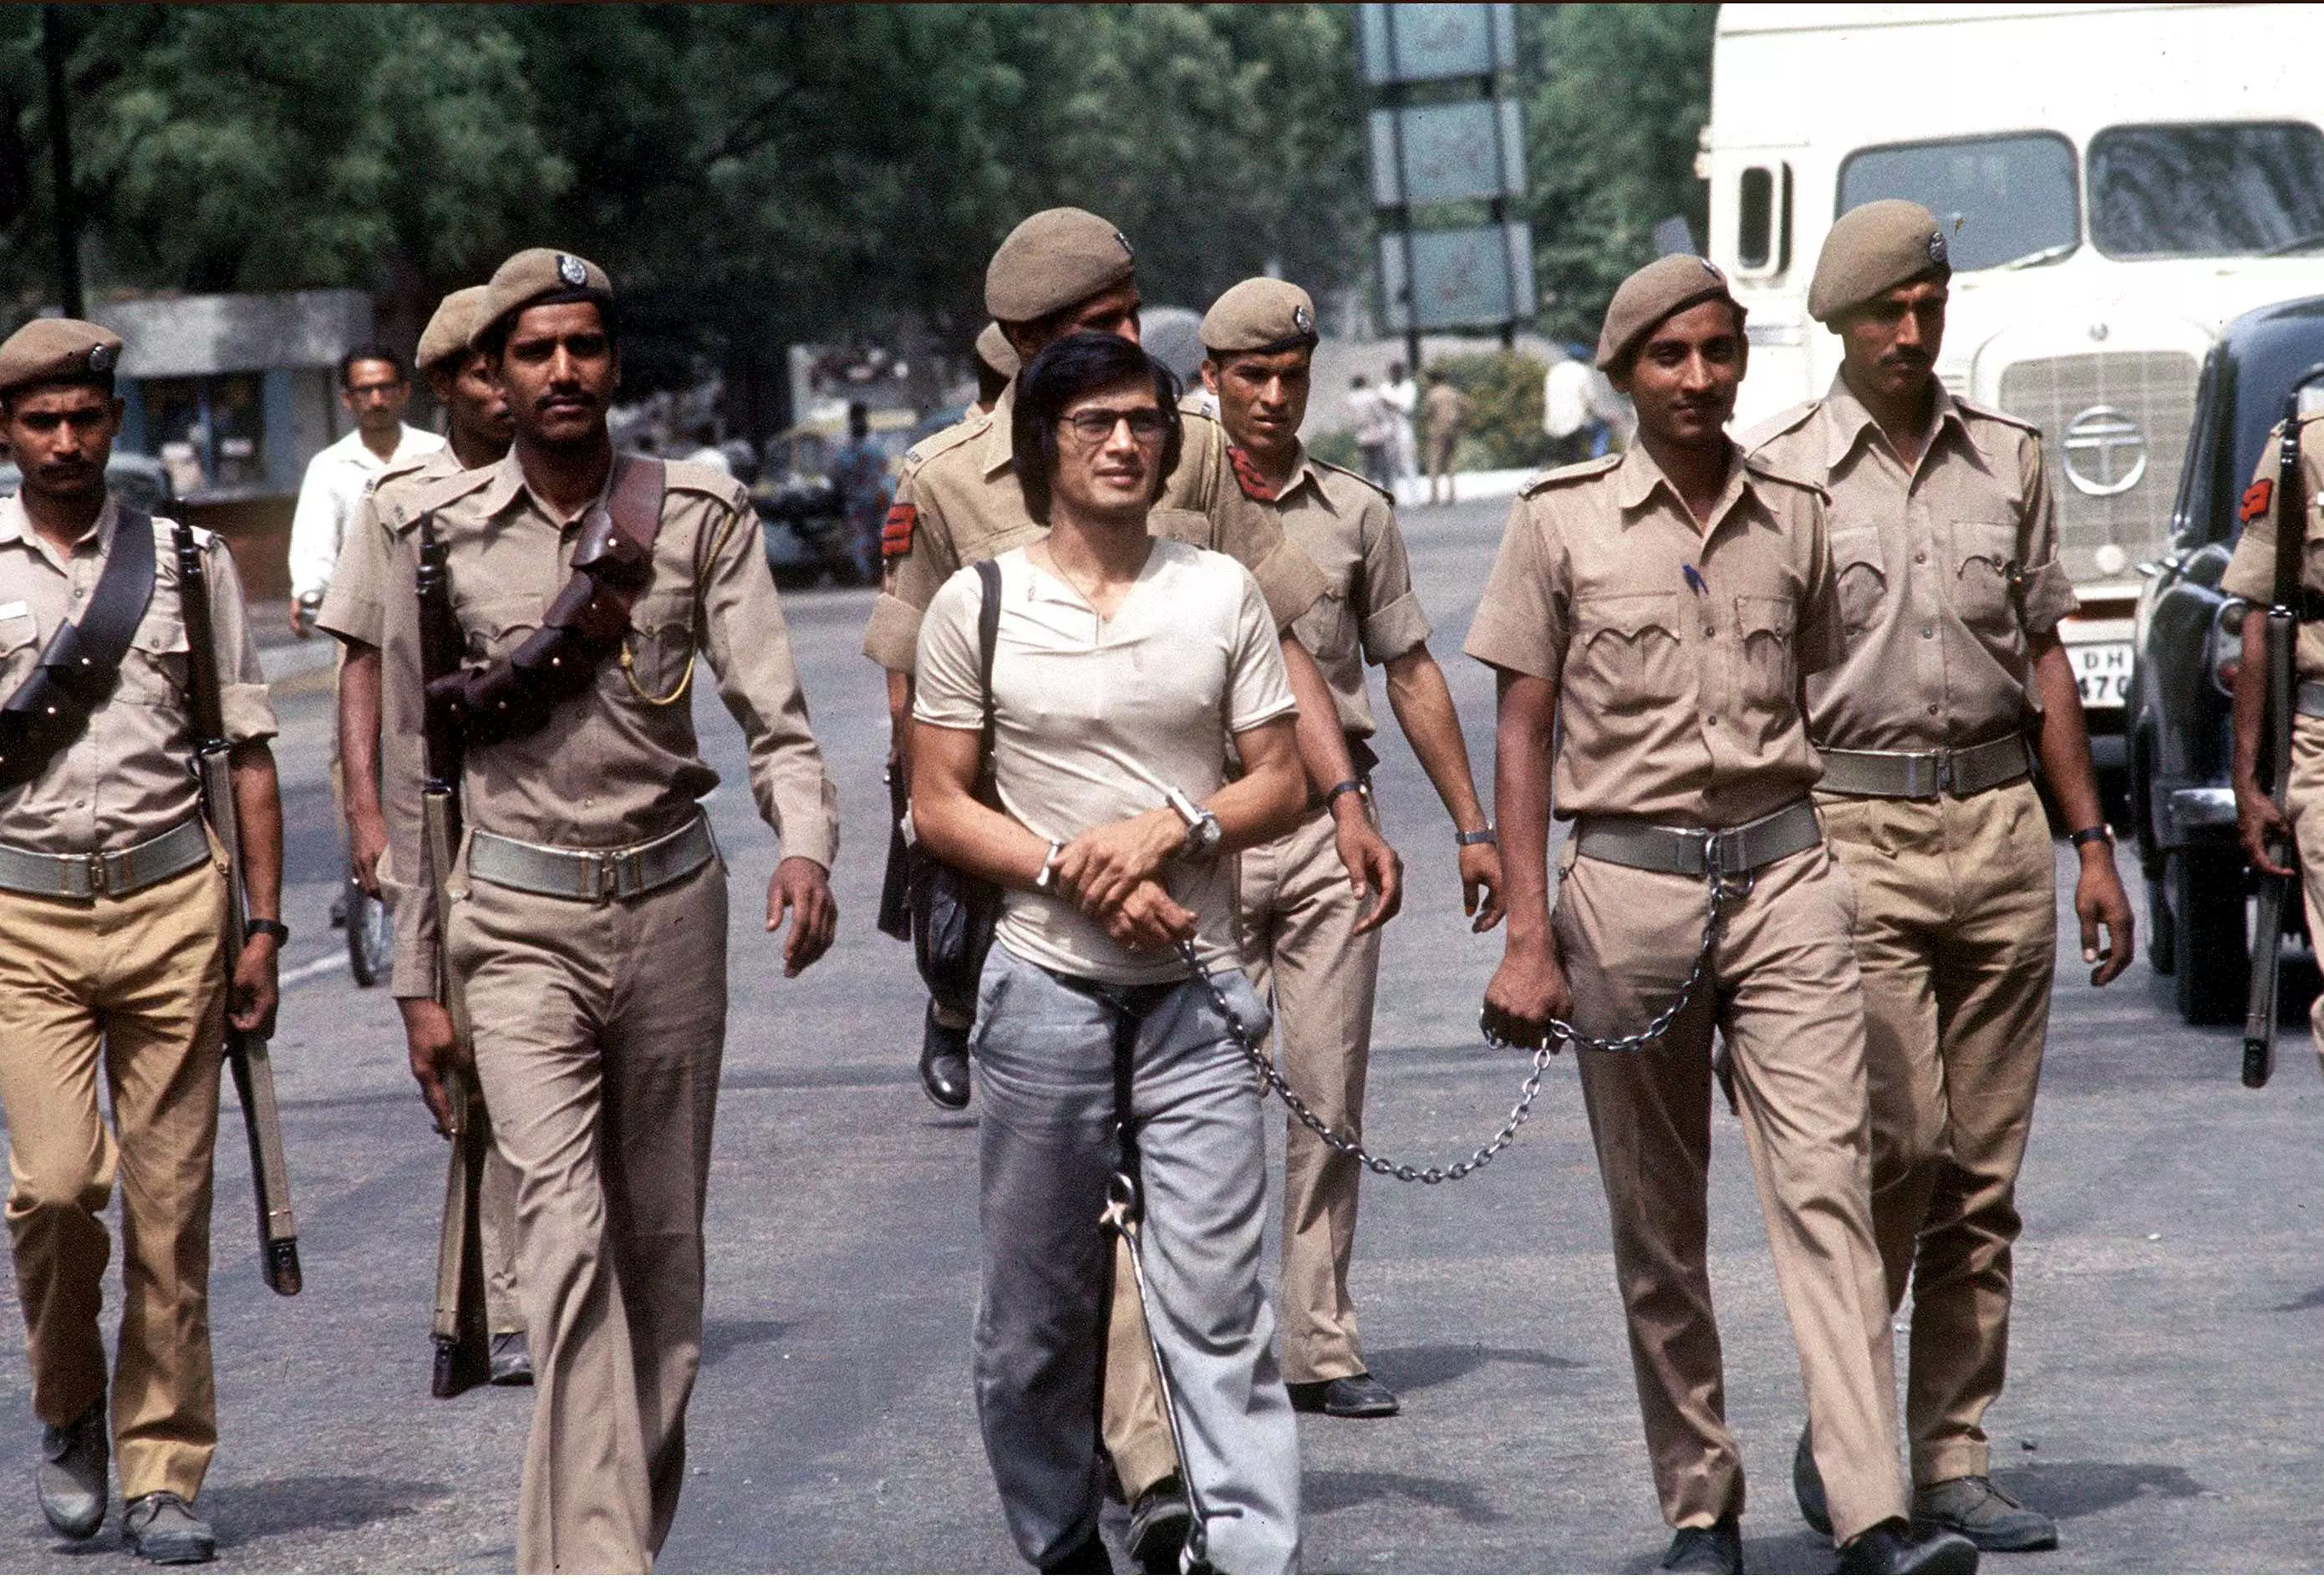 Real image of Sobhraj being led to jail (